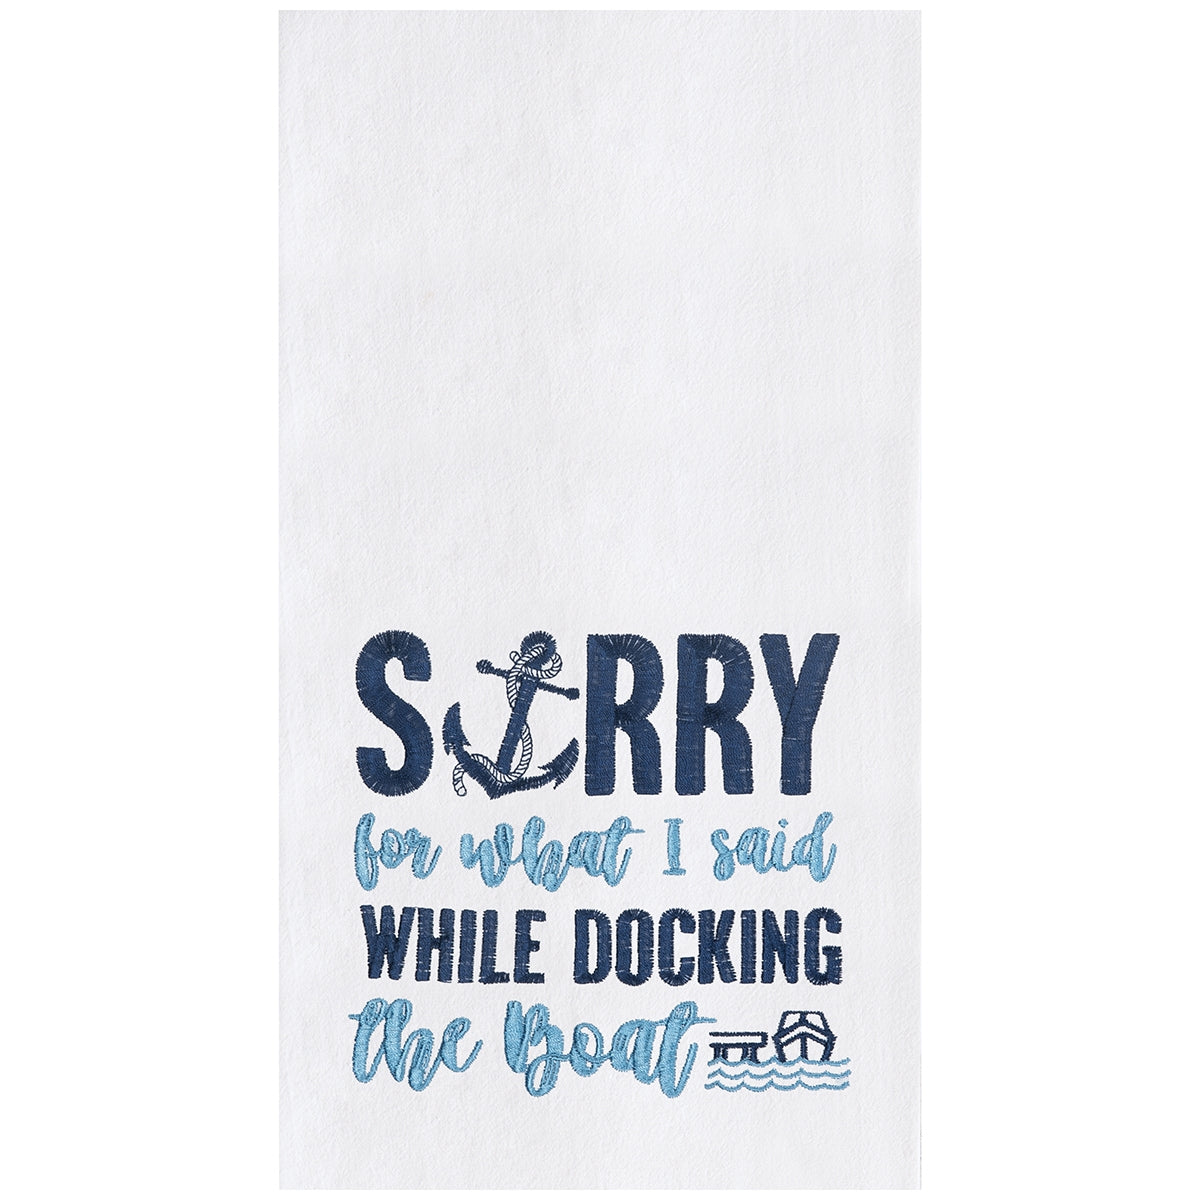 Docking The Boat Towel